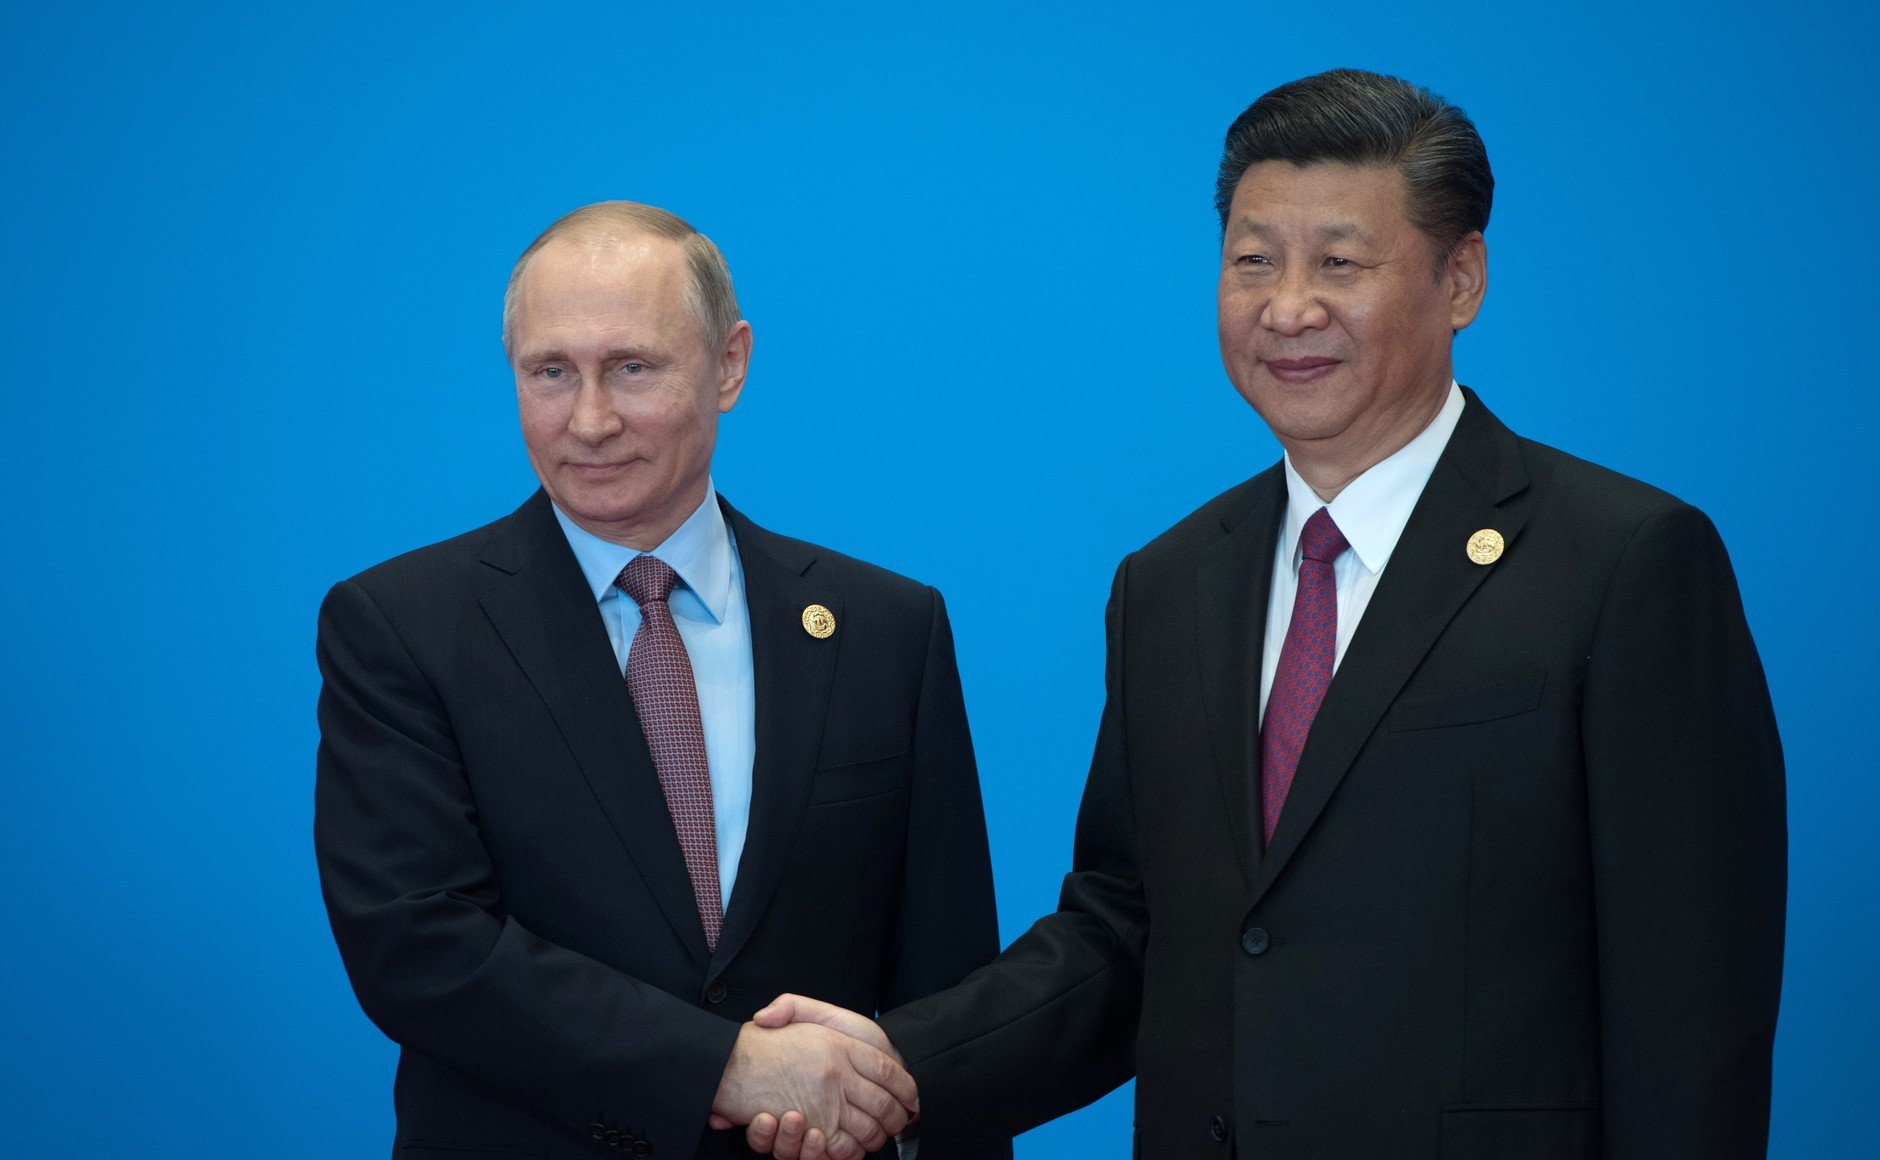 President of Russia Vladimir Putin with President of China Xi Jinping before a roundtable meeting of leaders during the Belt and Road international forum. Photo by the Russian Presidential Press and Information Office.